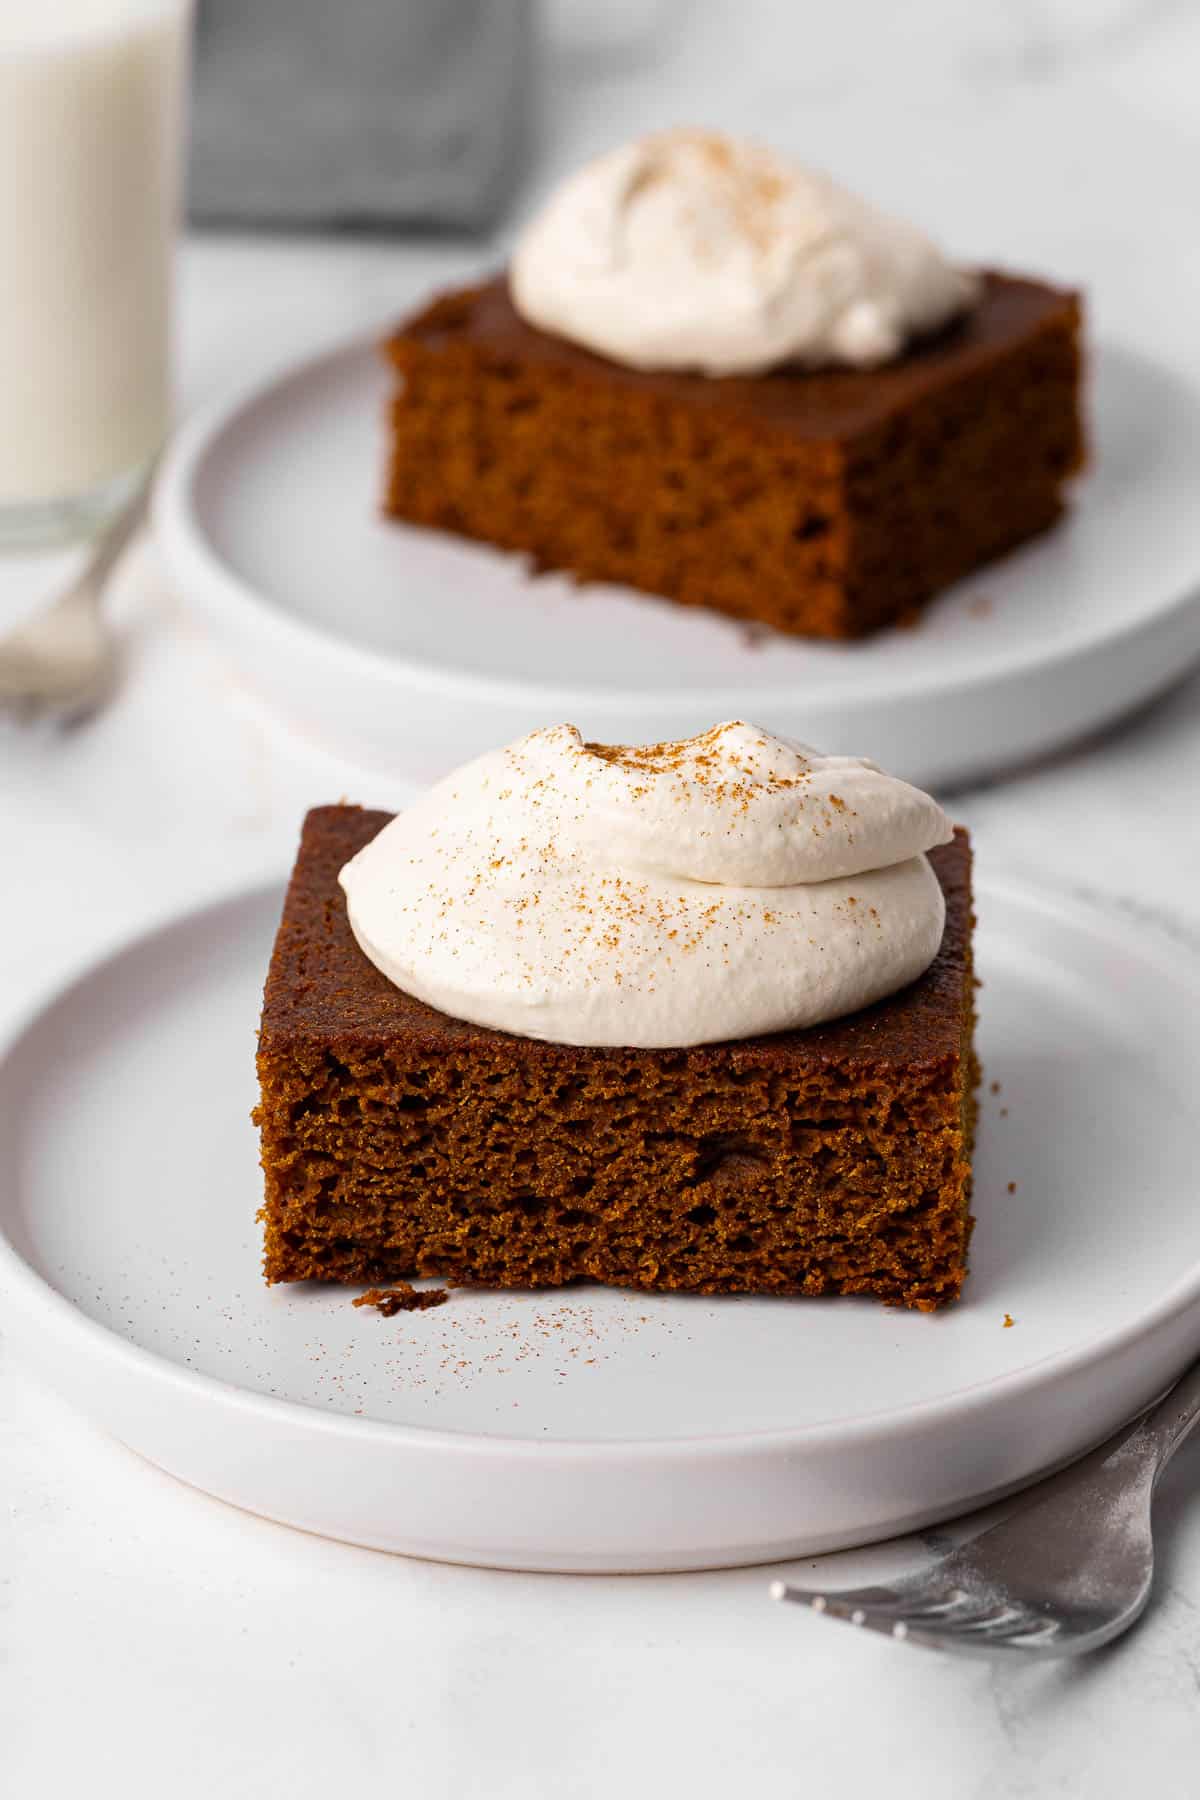 2 small plates with a slice of gingerbread topped with soft whipped cream and ground cinnamon.